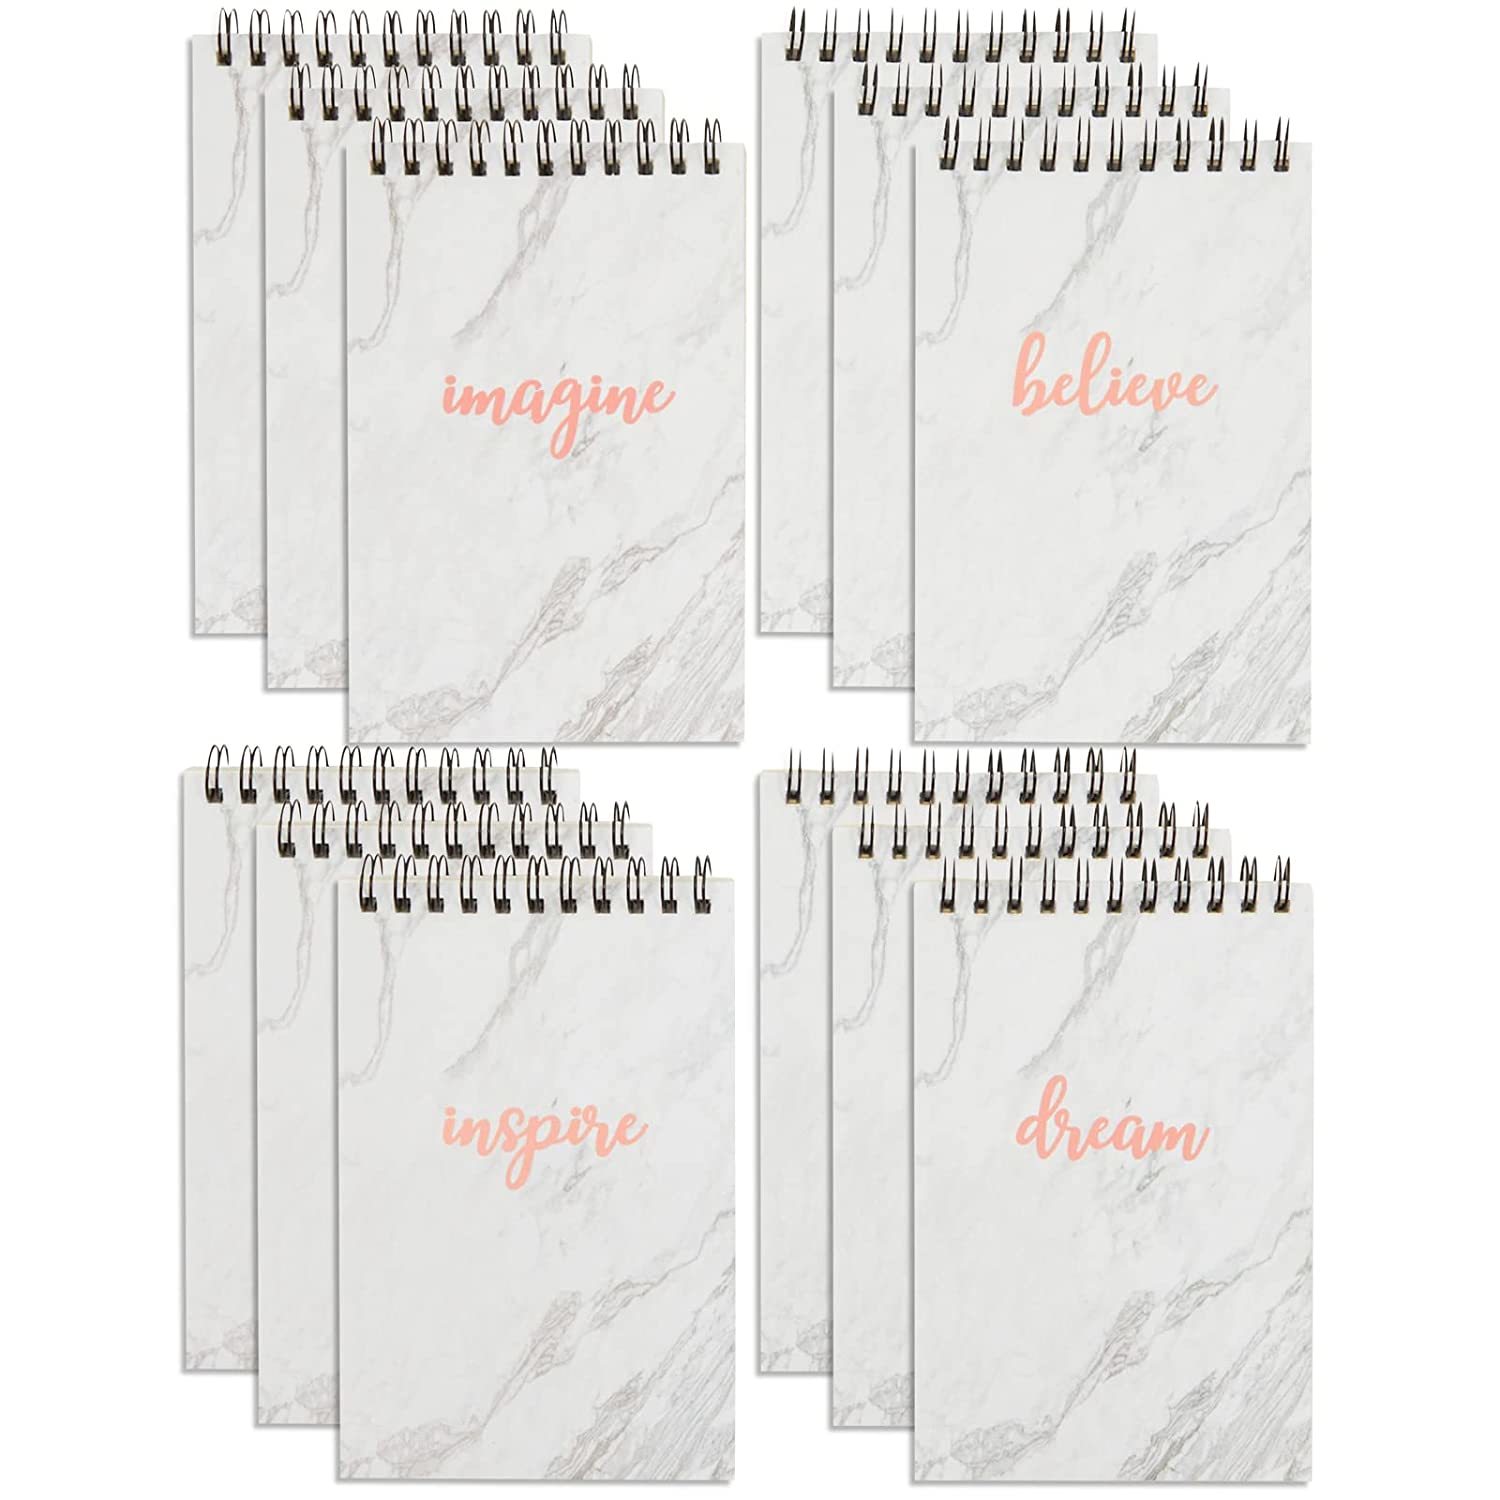 Primary image for 12 Pack Mini Spiral Top Bound Notebooks, Inspirational Marble Rose Gold Note Pad